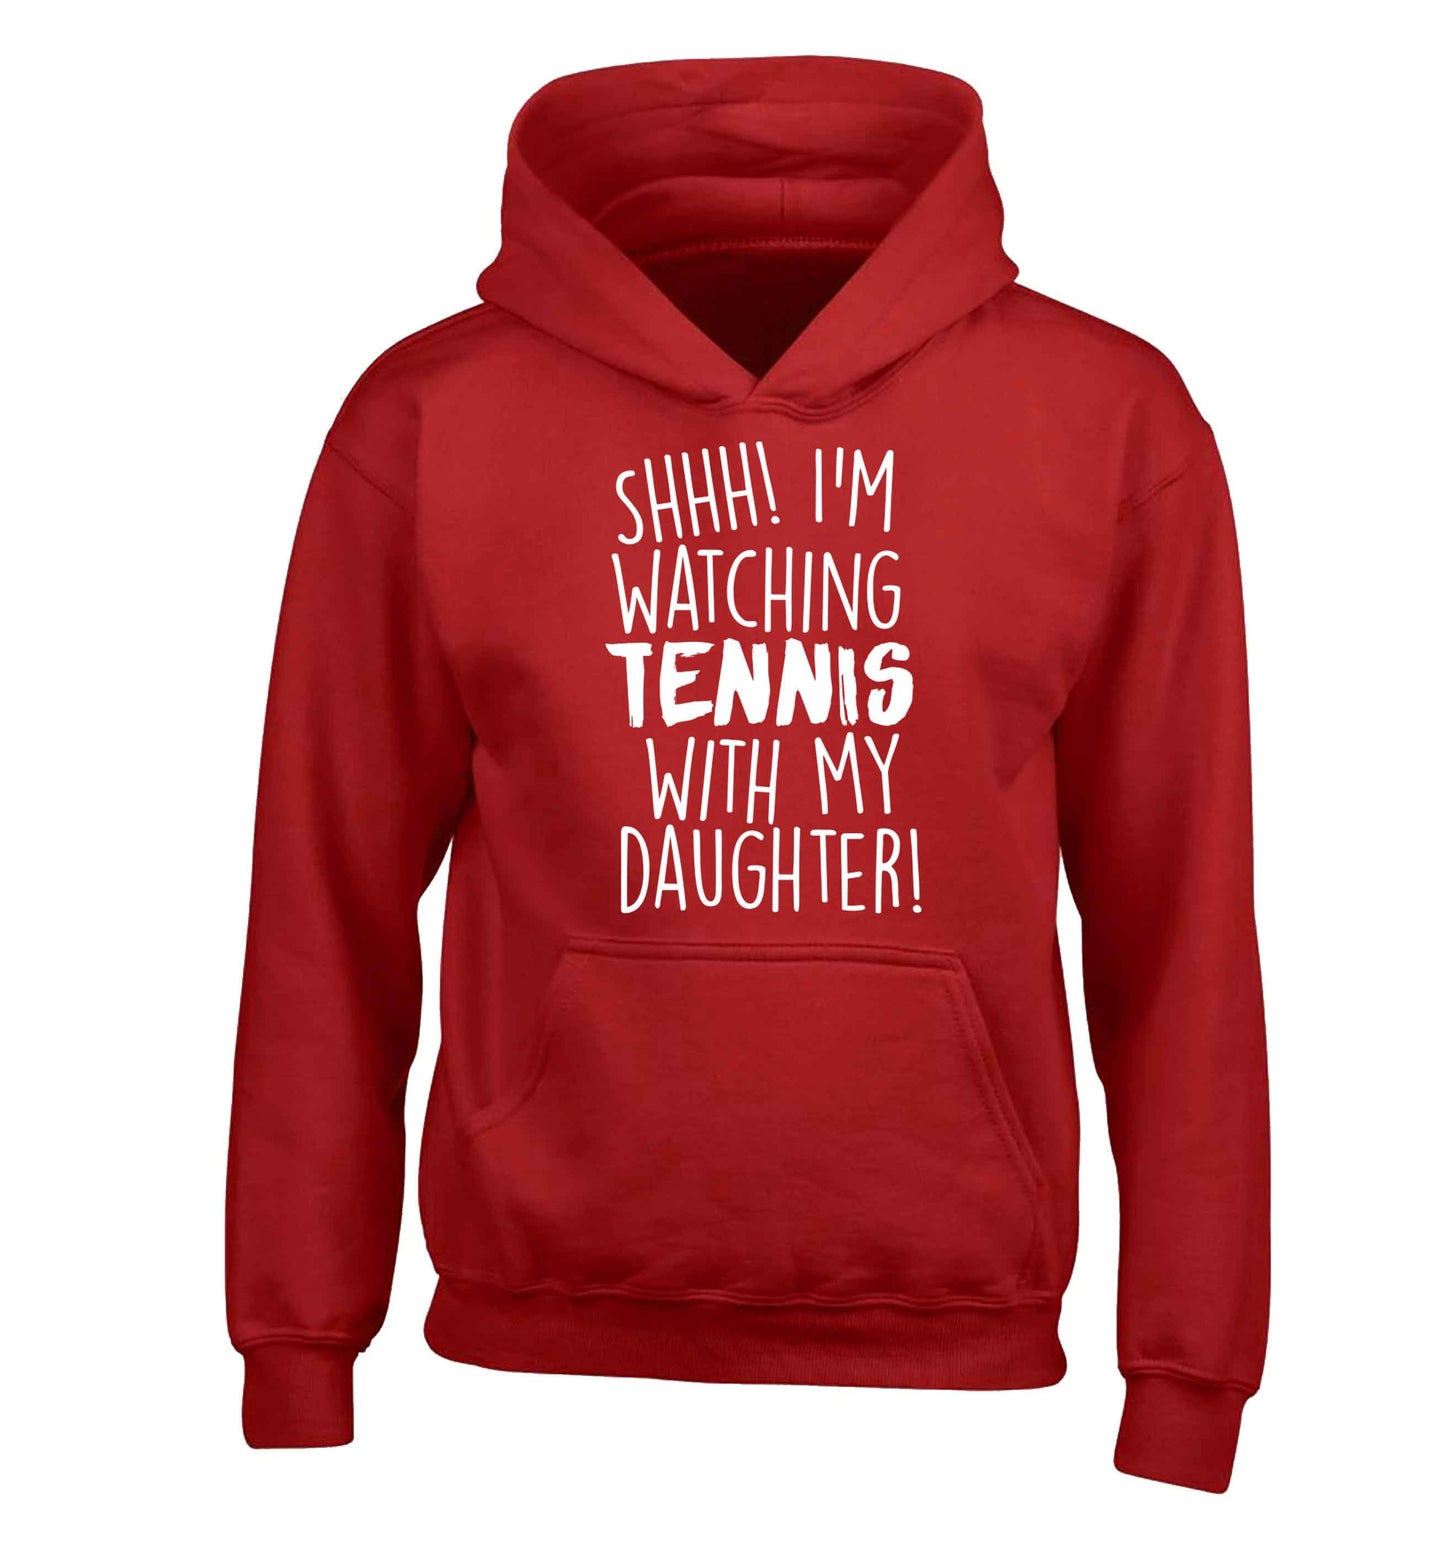 Shh! I'm watching tennis with my daughter! children's red hoodie 12-13 Years